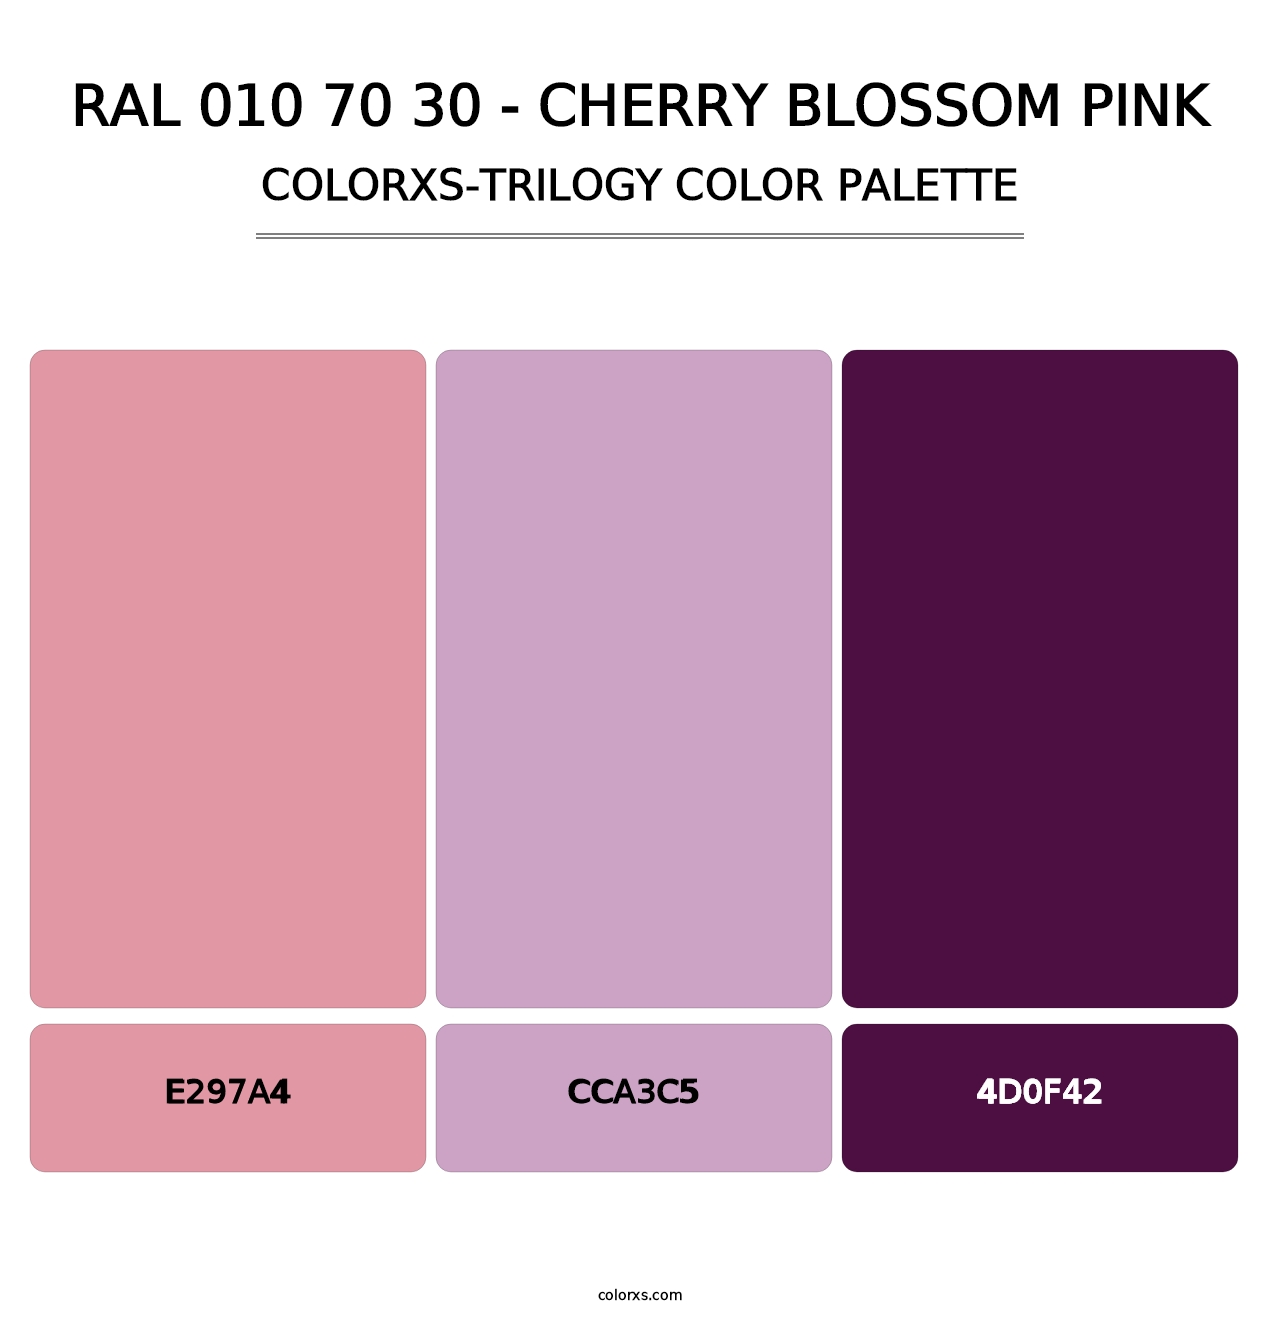 RAL 010 70 30 - Cherry Blossom Pink - Colorxs Trilogy Palette